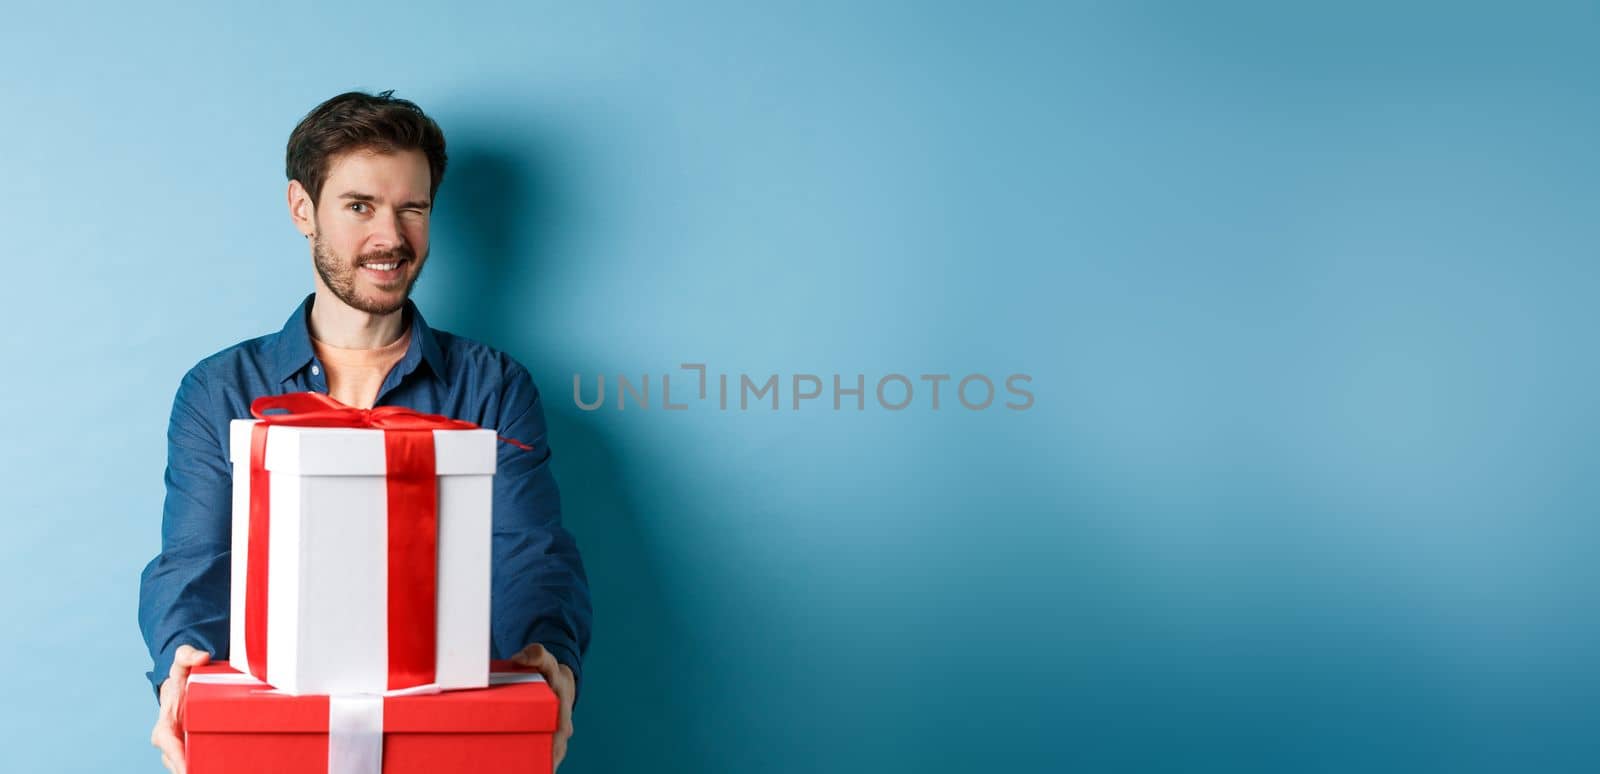 Handsome boyfriend winking at camera and wishing happy valentines day, extending hands with gift boxes, making romantic surprise, standing over blue background.